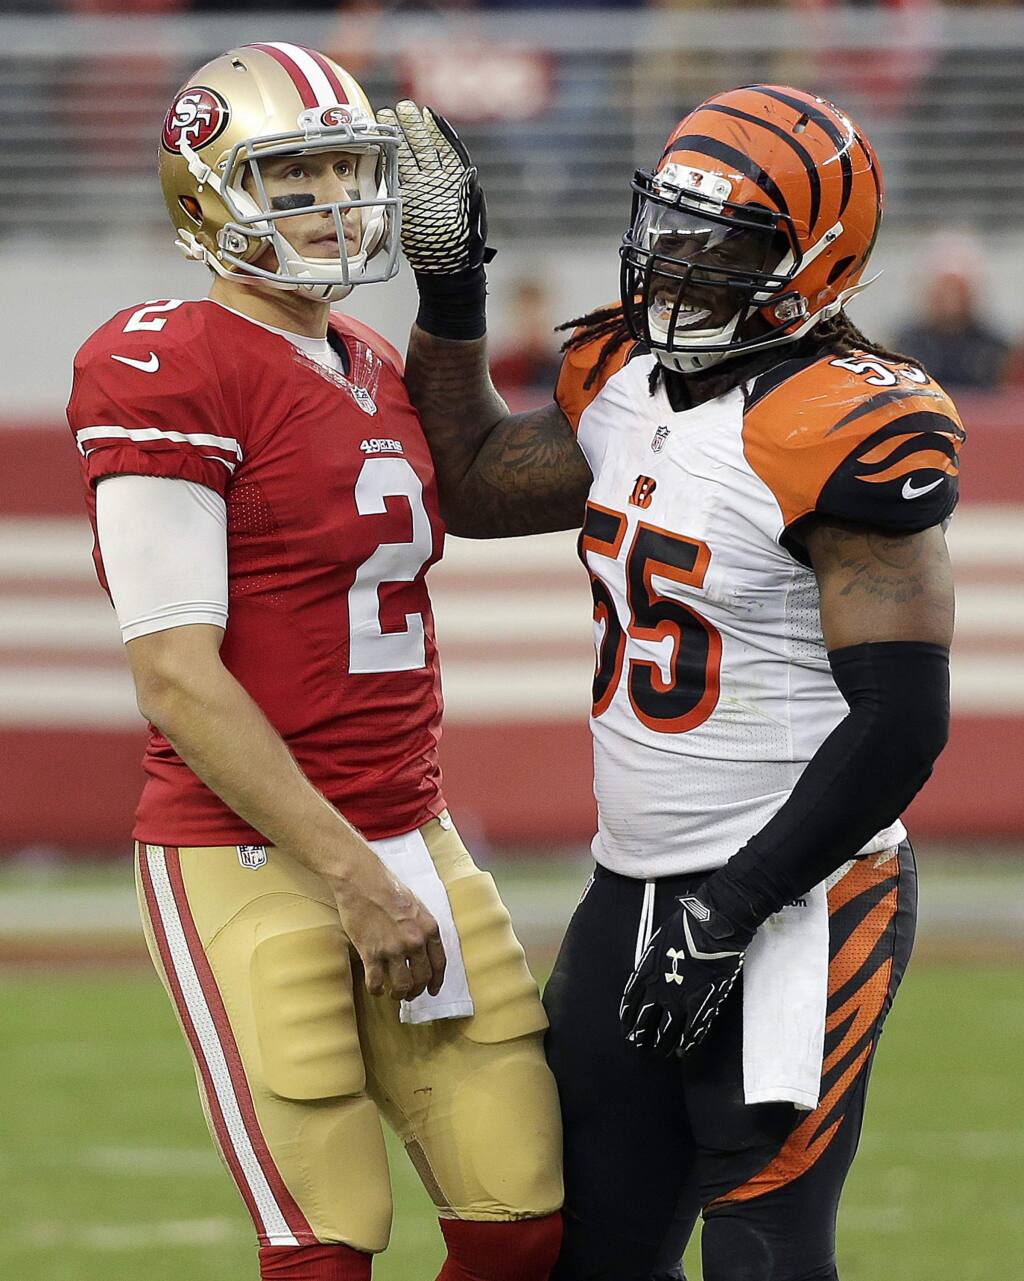 Bengals clinch playoffs at 49ers' expense, 24-14